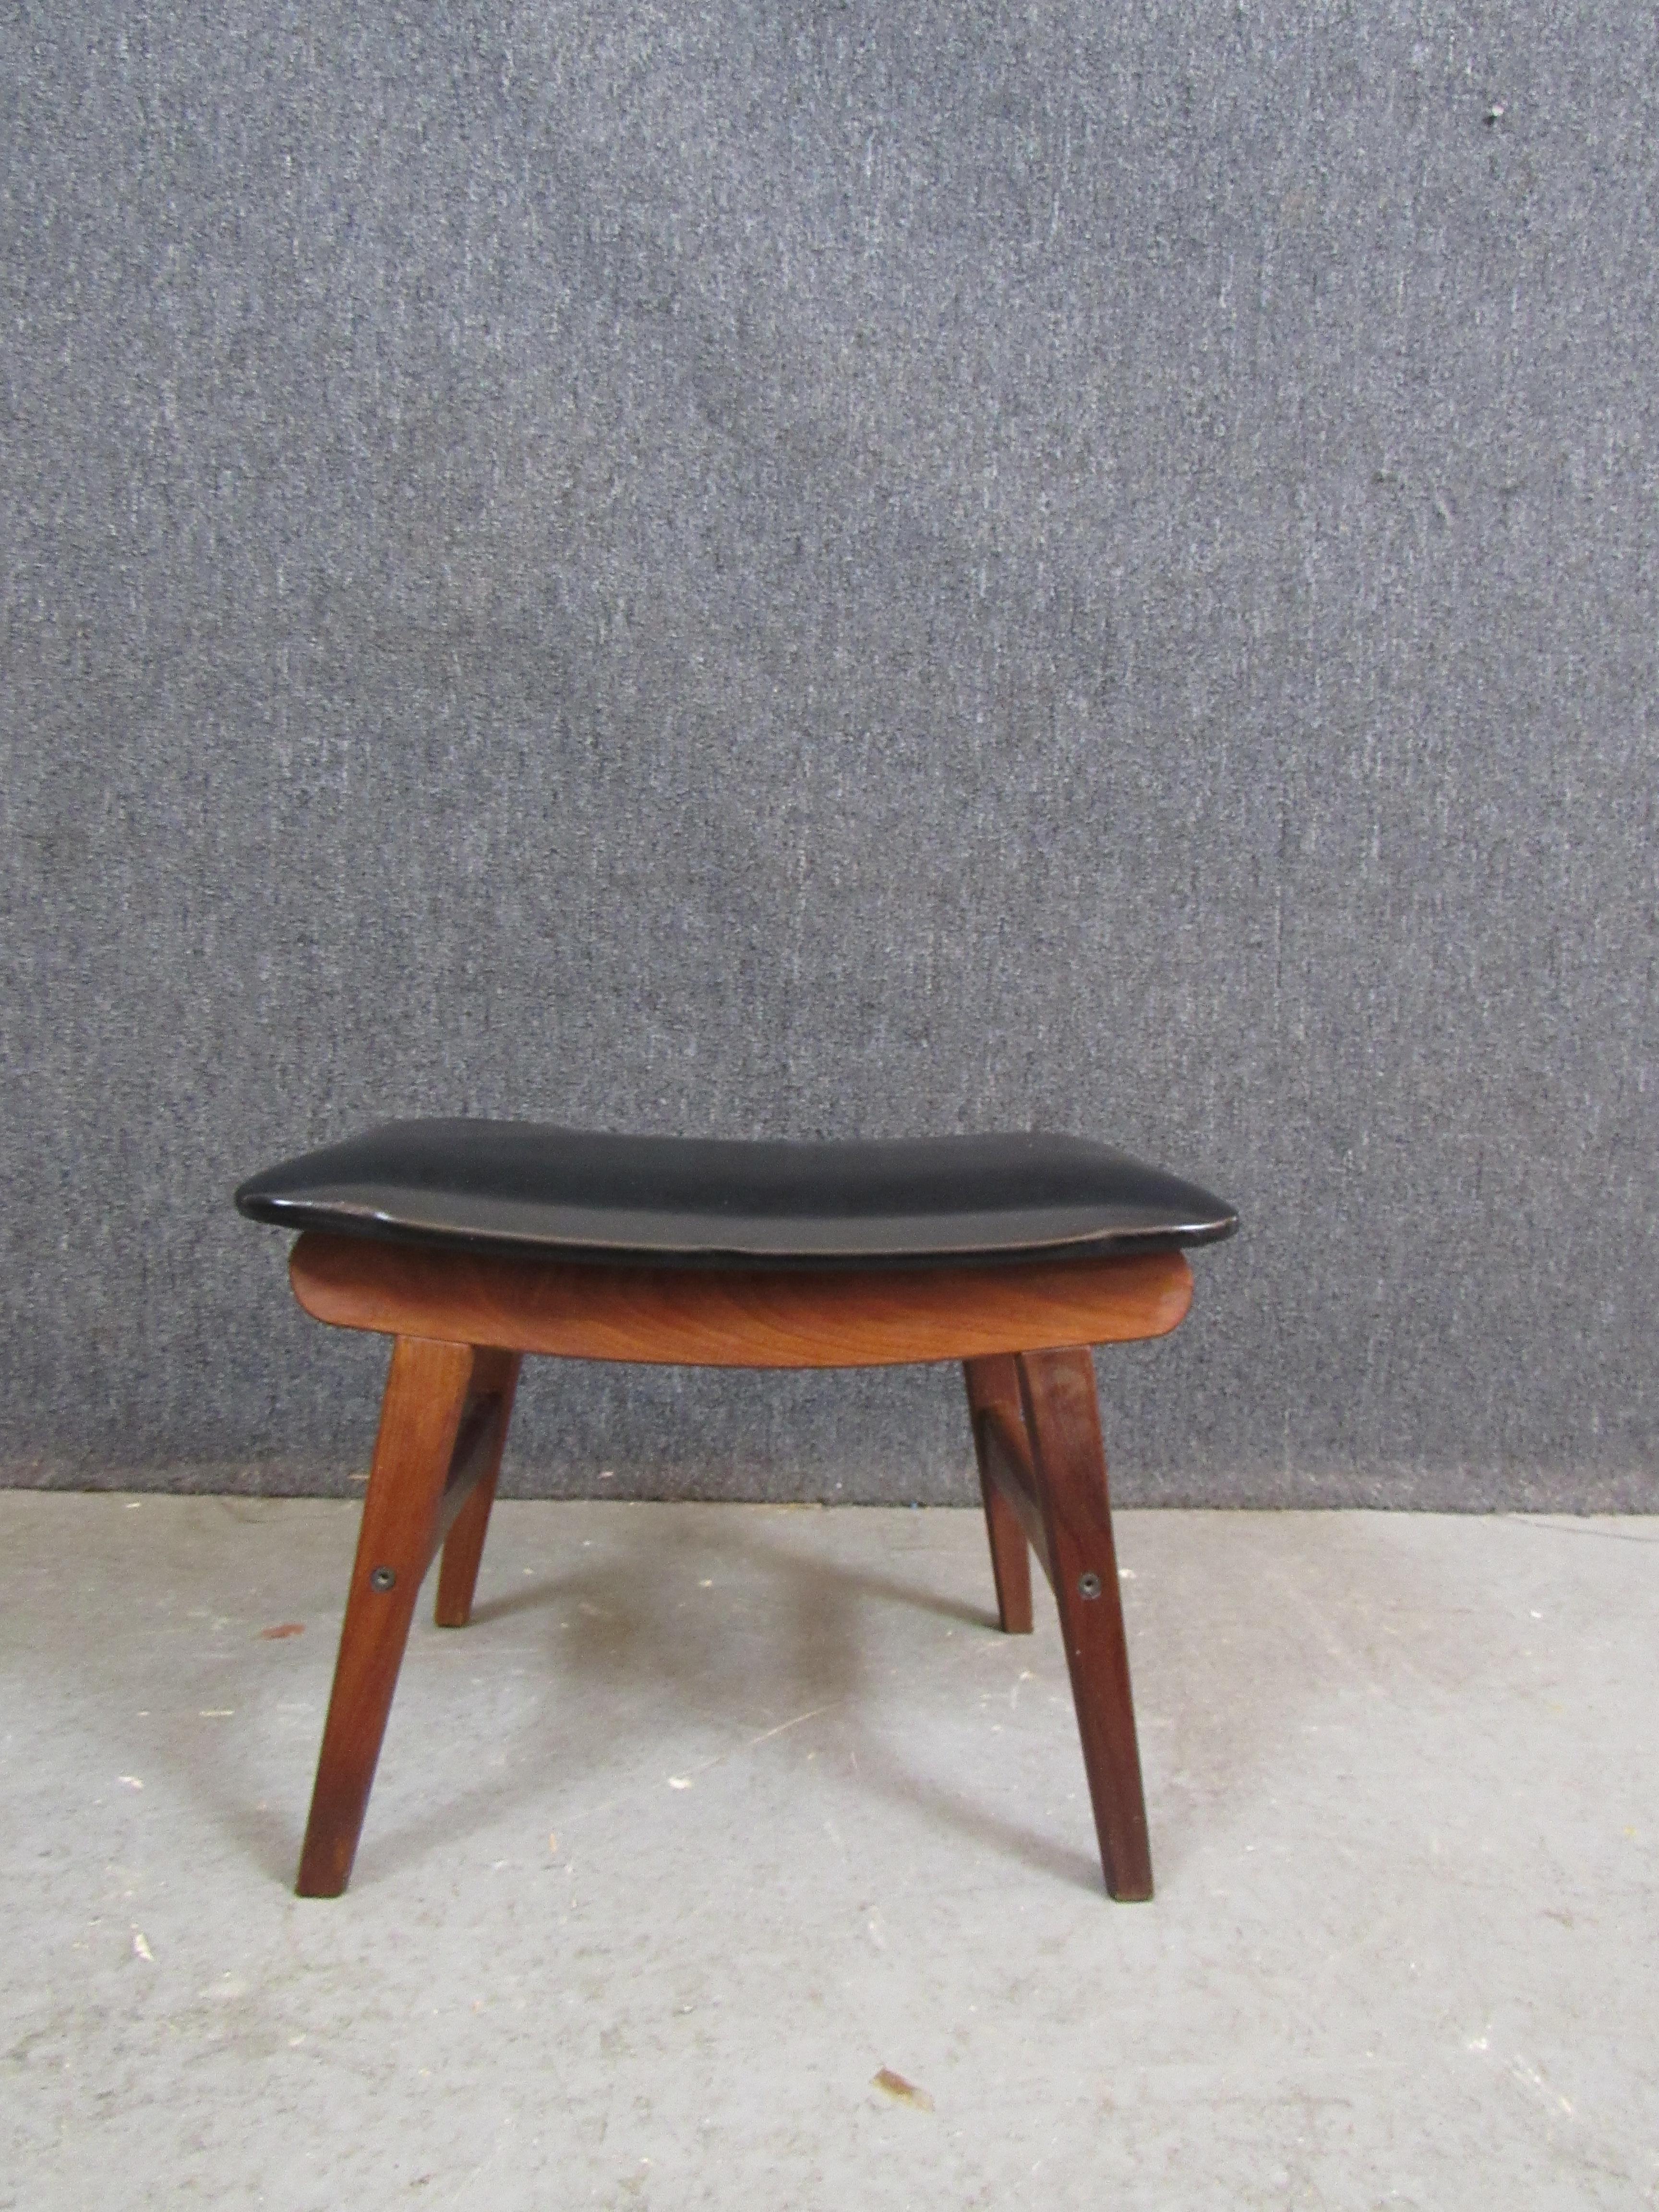 Put up your feet and enjoy all the comfort and charms of mid-century Danish design with this wonderful teak ottoman made by Fredly Möbelfabrik of Denmark. With warm wood grain, a pagoda-inspired silhouette, and a sleek black faux leather cushion,